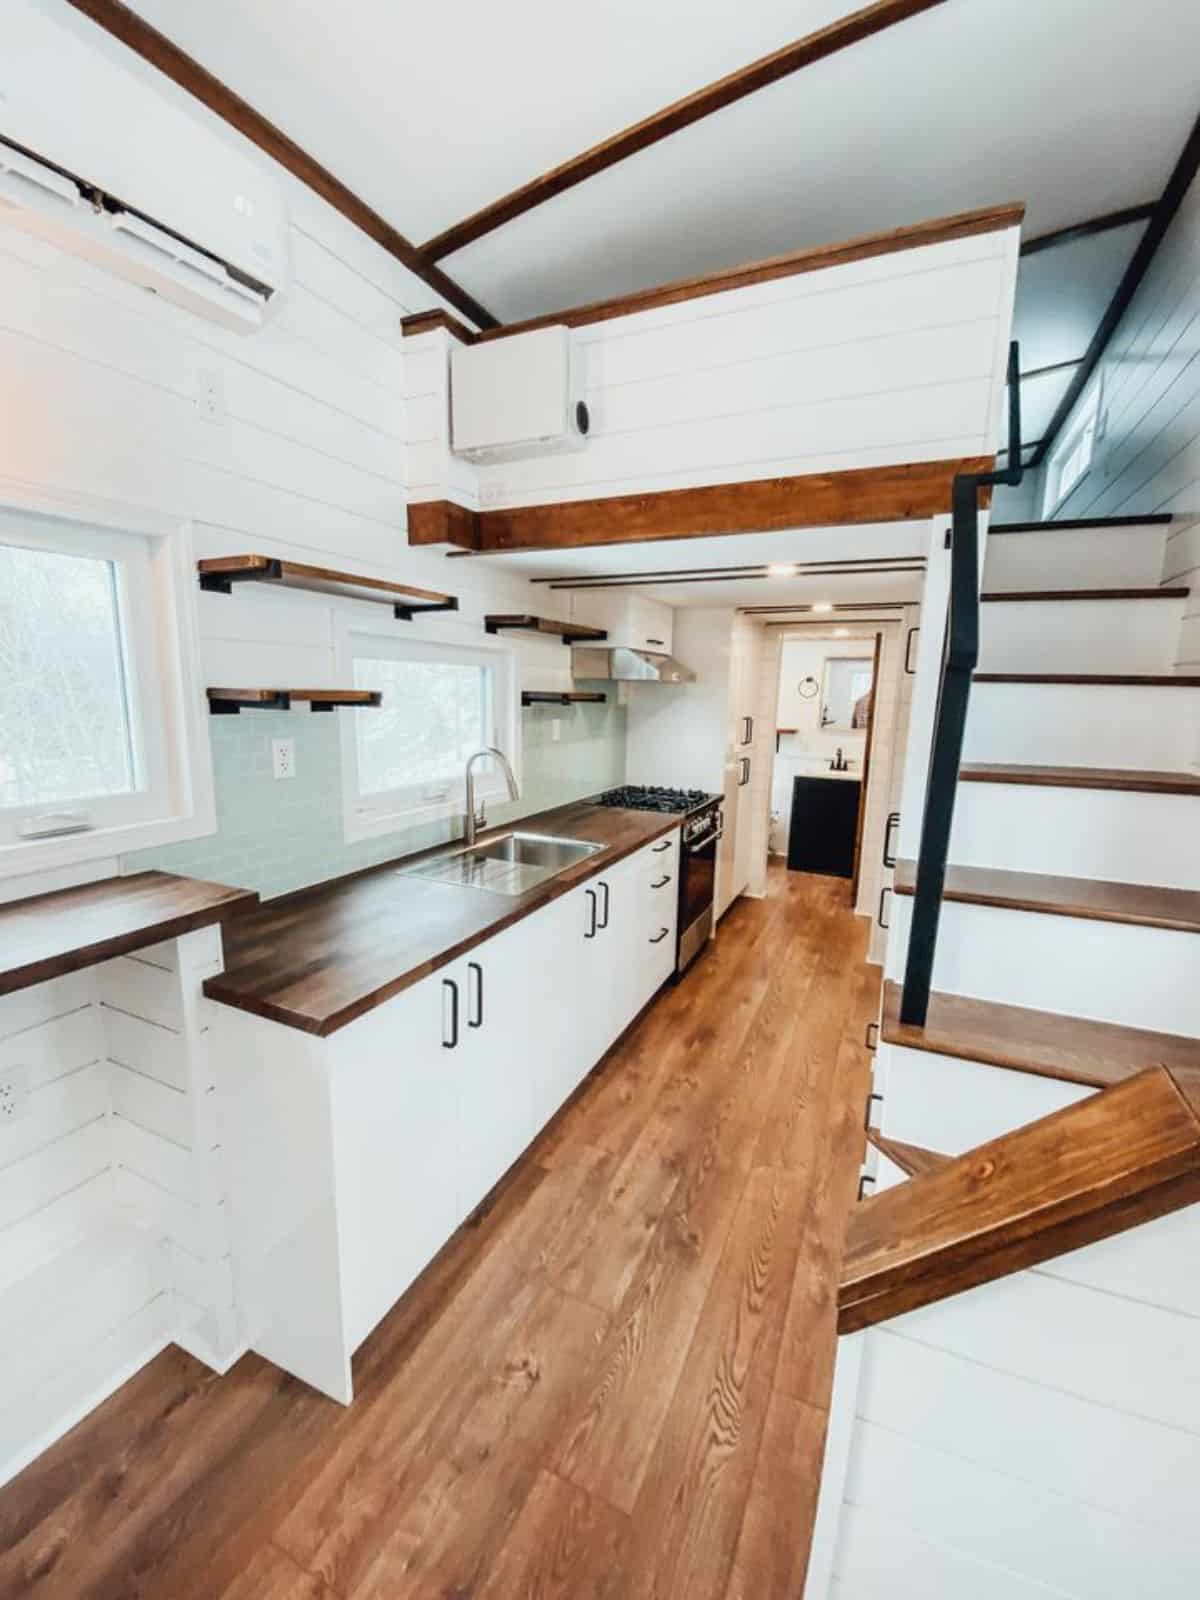 overall stunning wooden interiors of 28’ tiny home in Canada